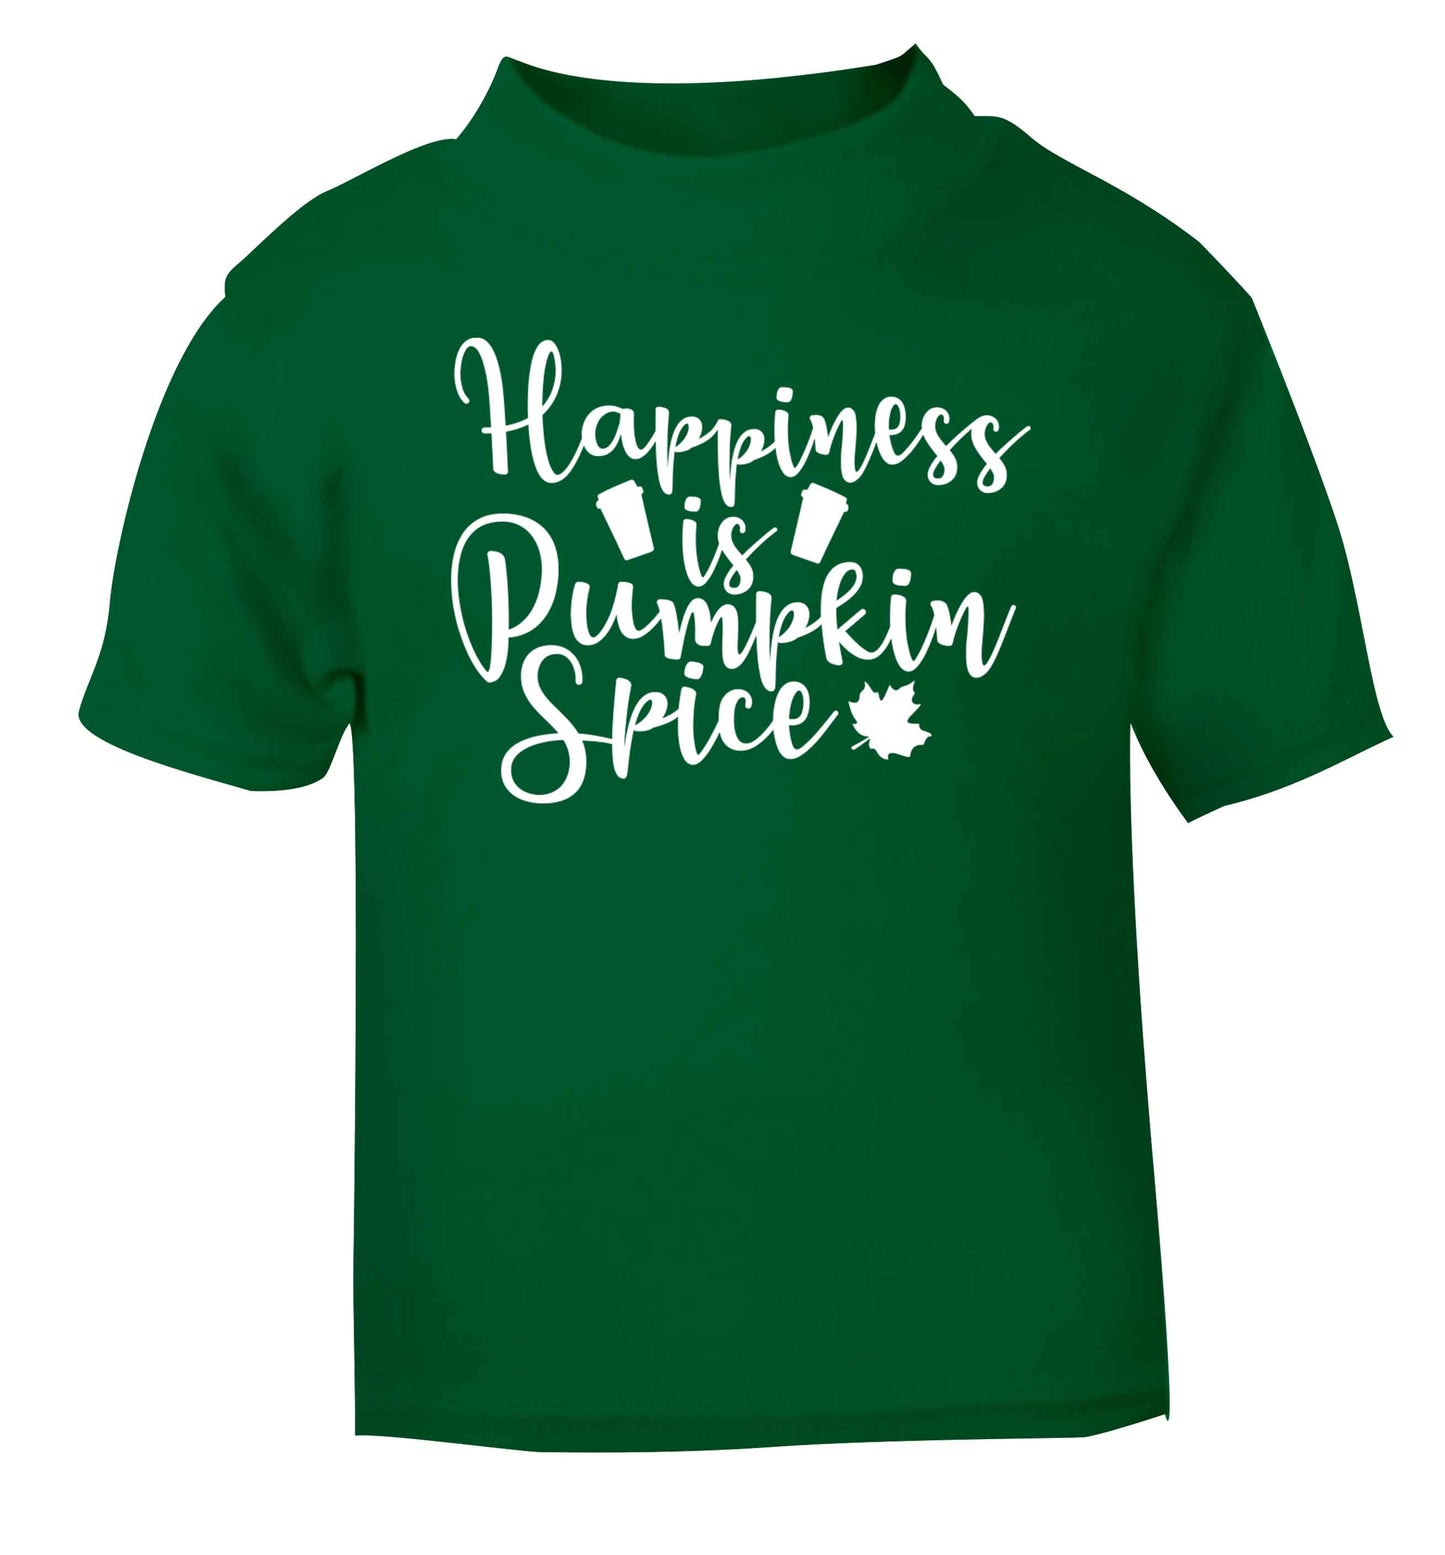 Happiness Pumpkin Spice green baby toddler Tshirt 2 Years